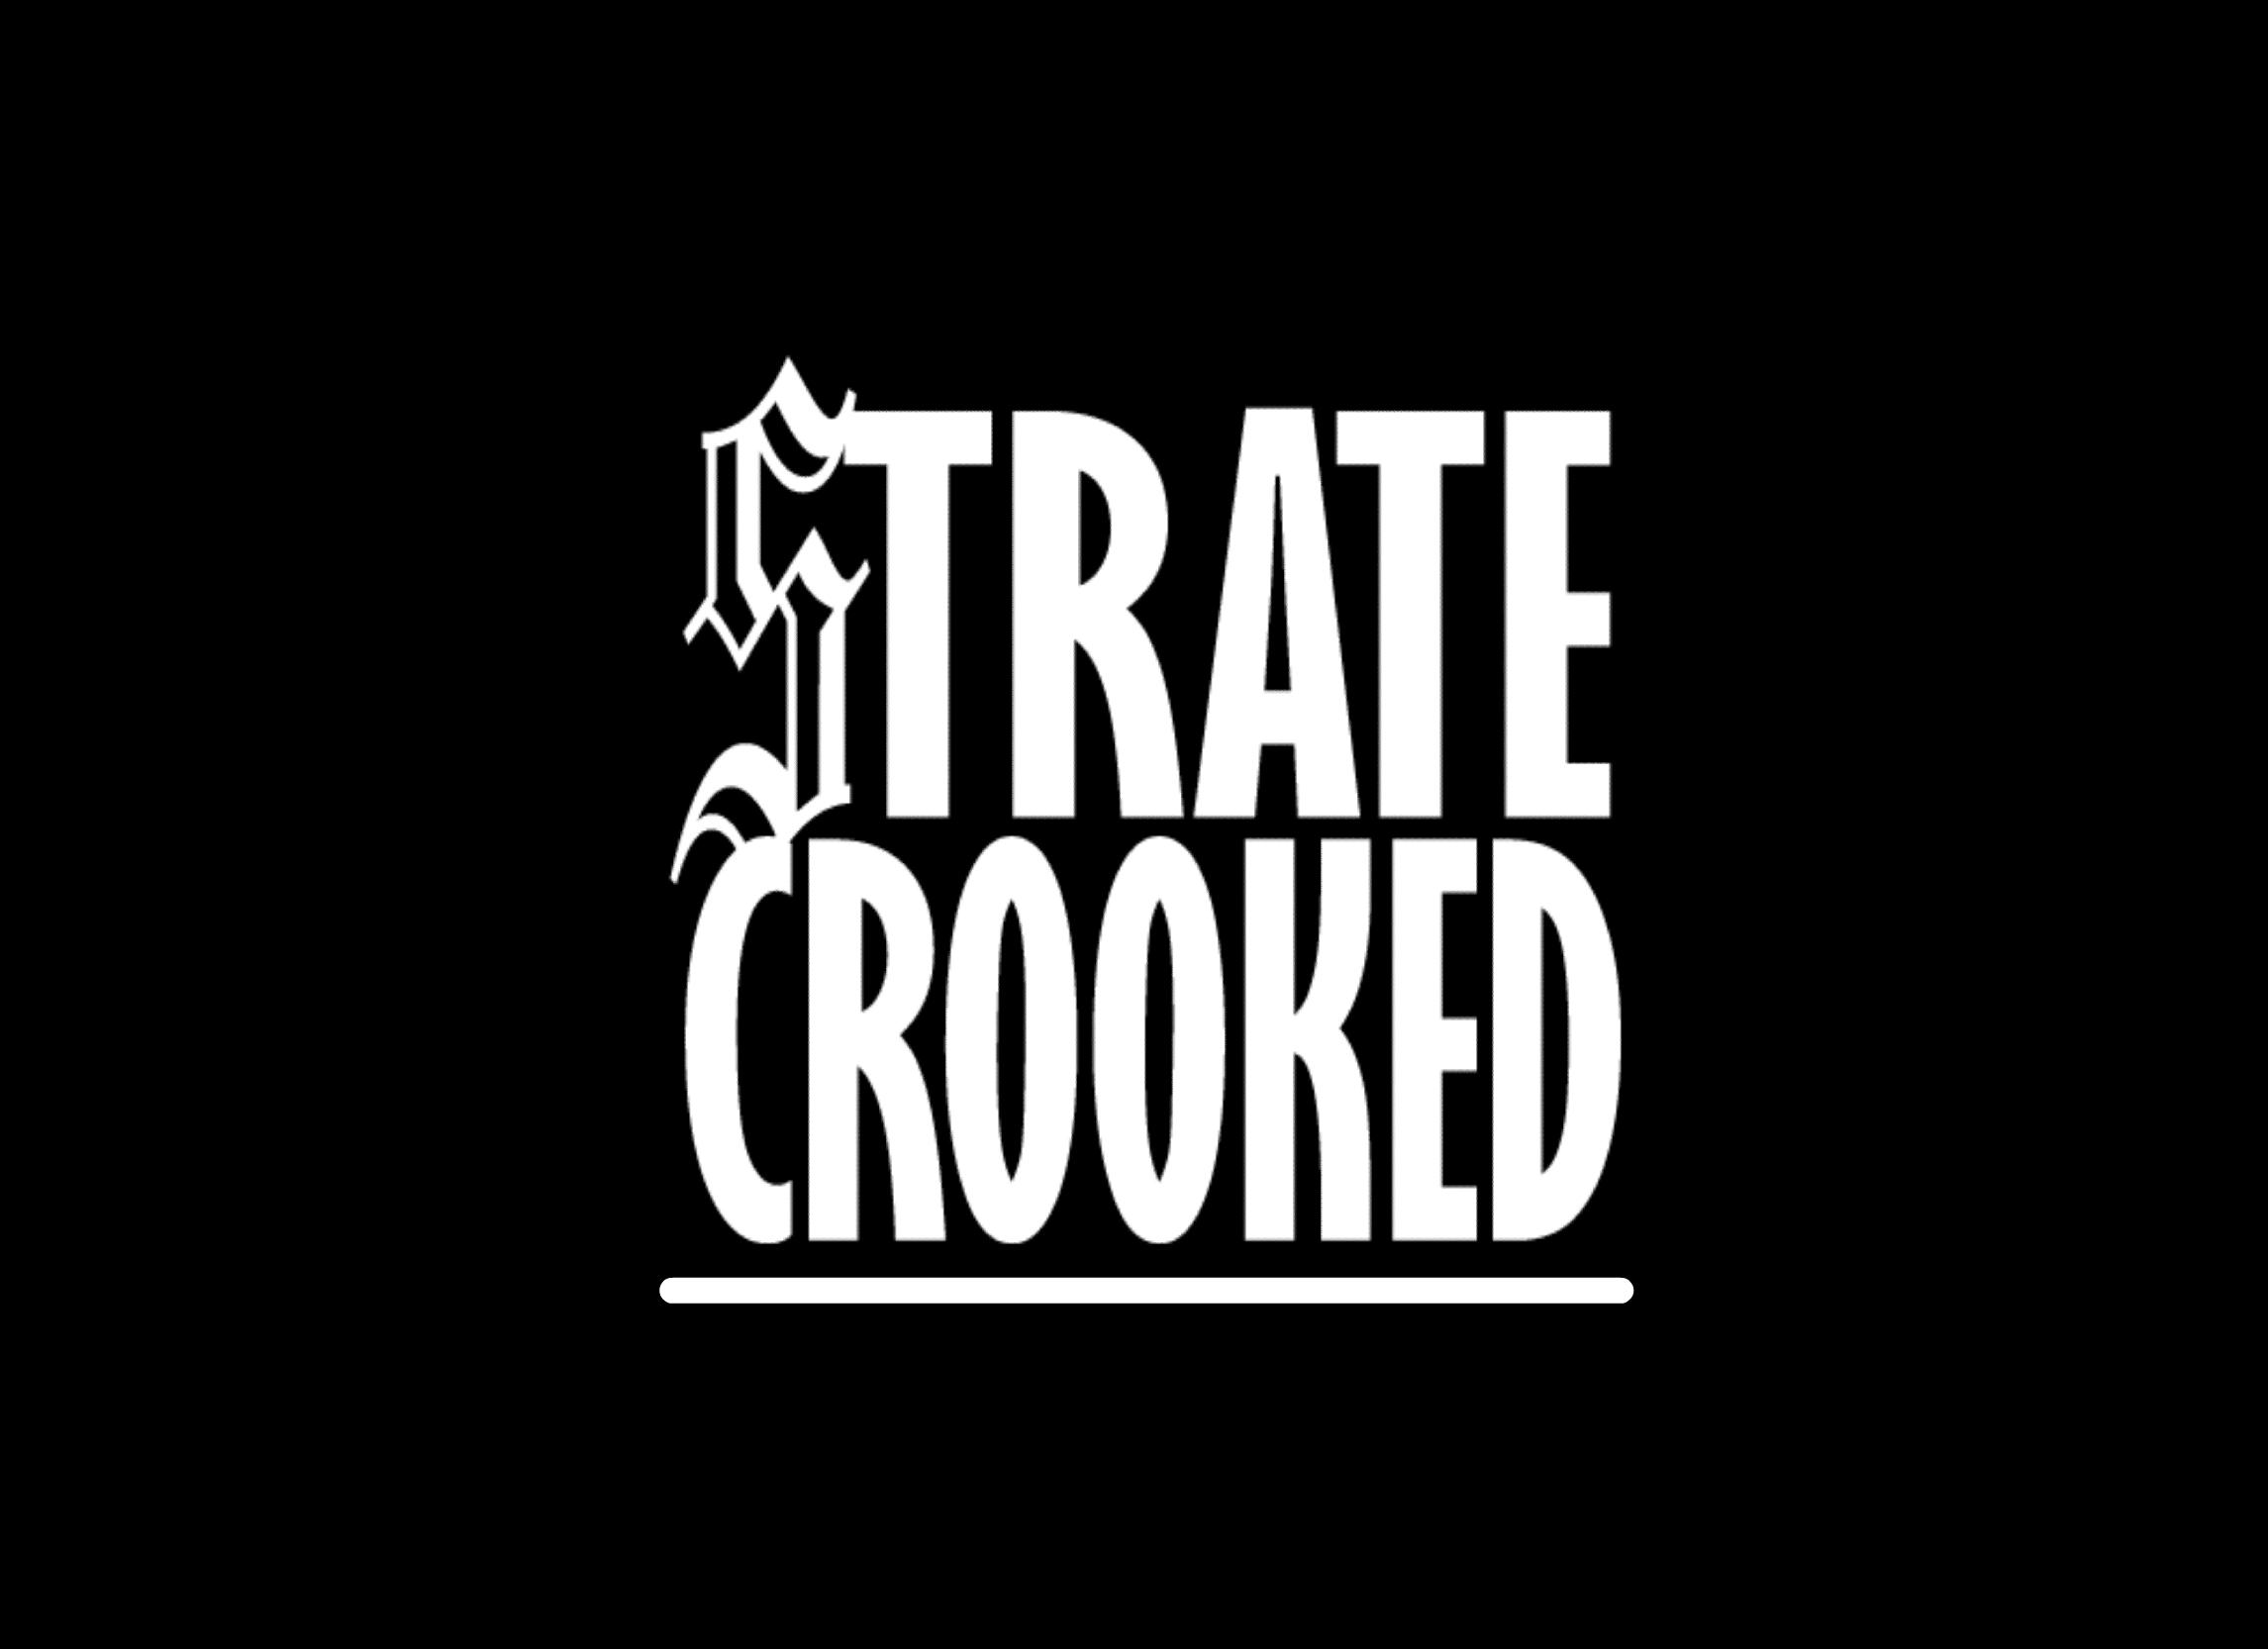 Strate Crooked